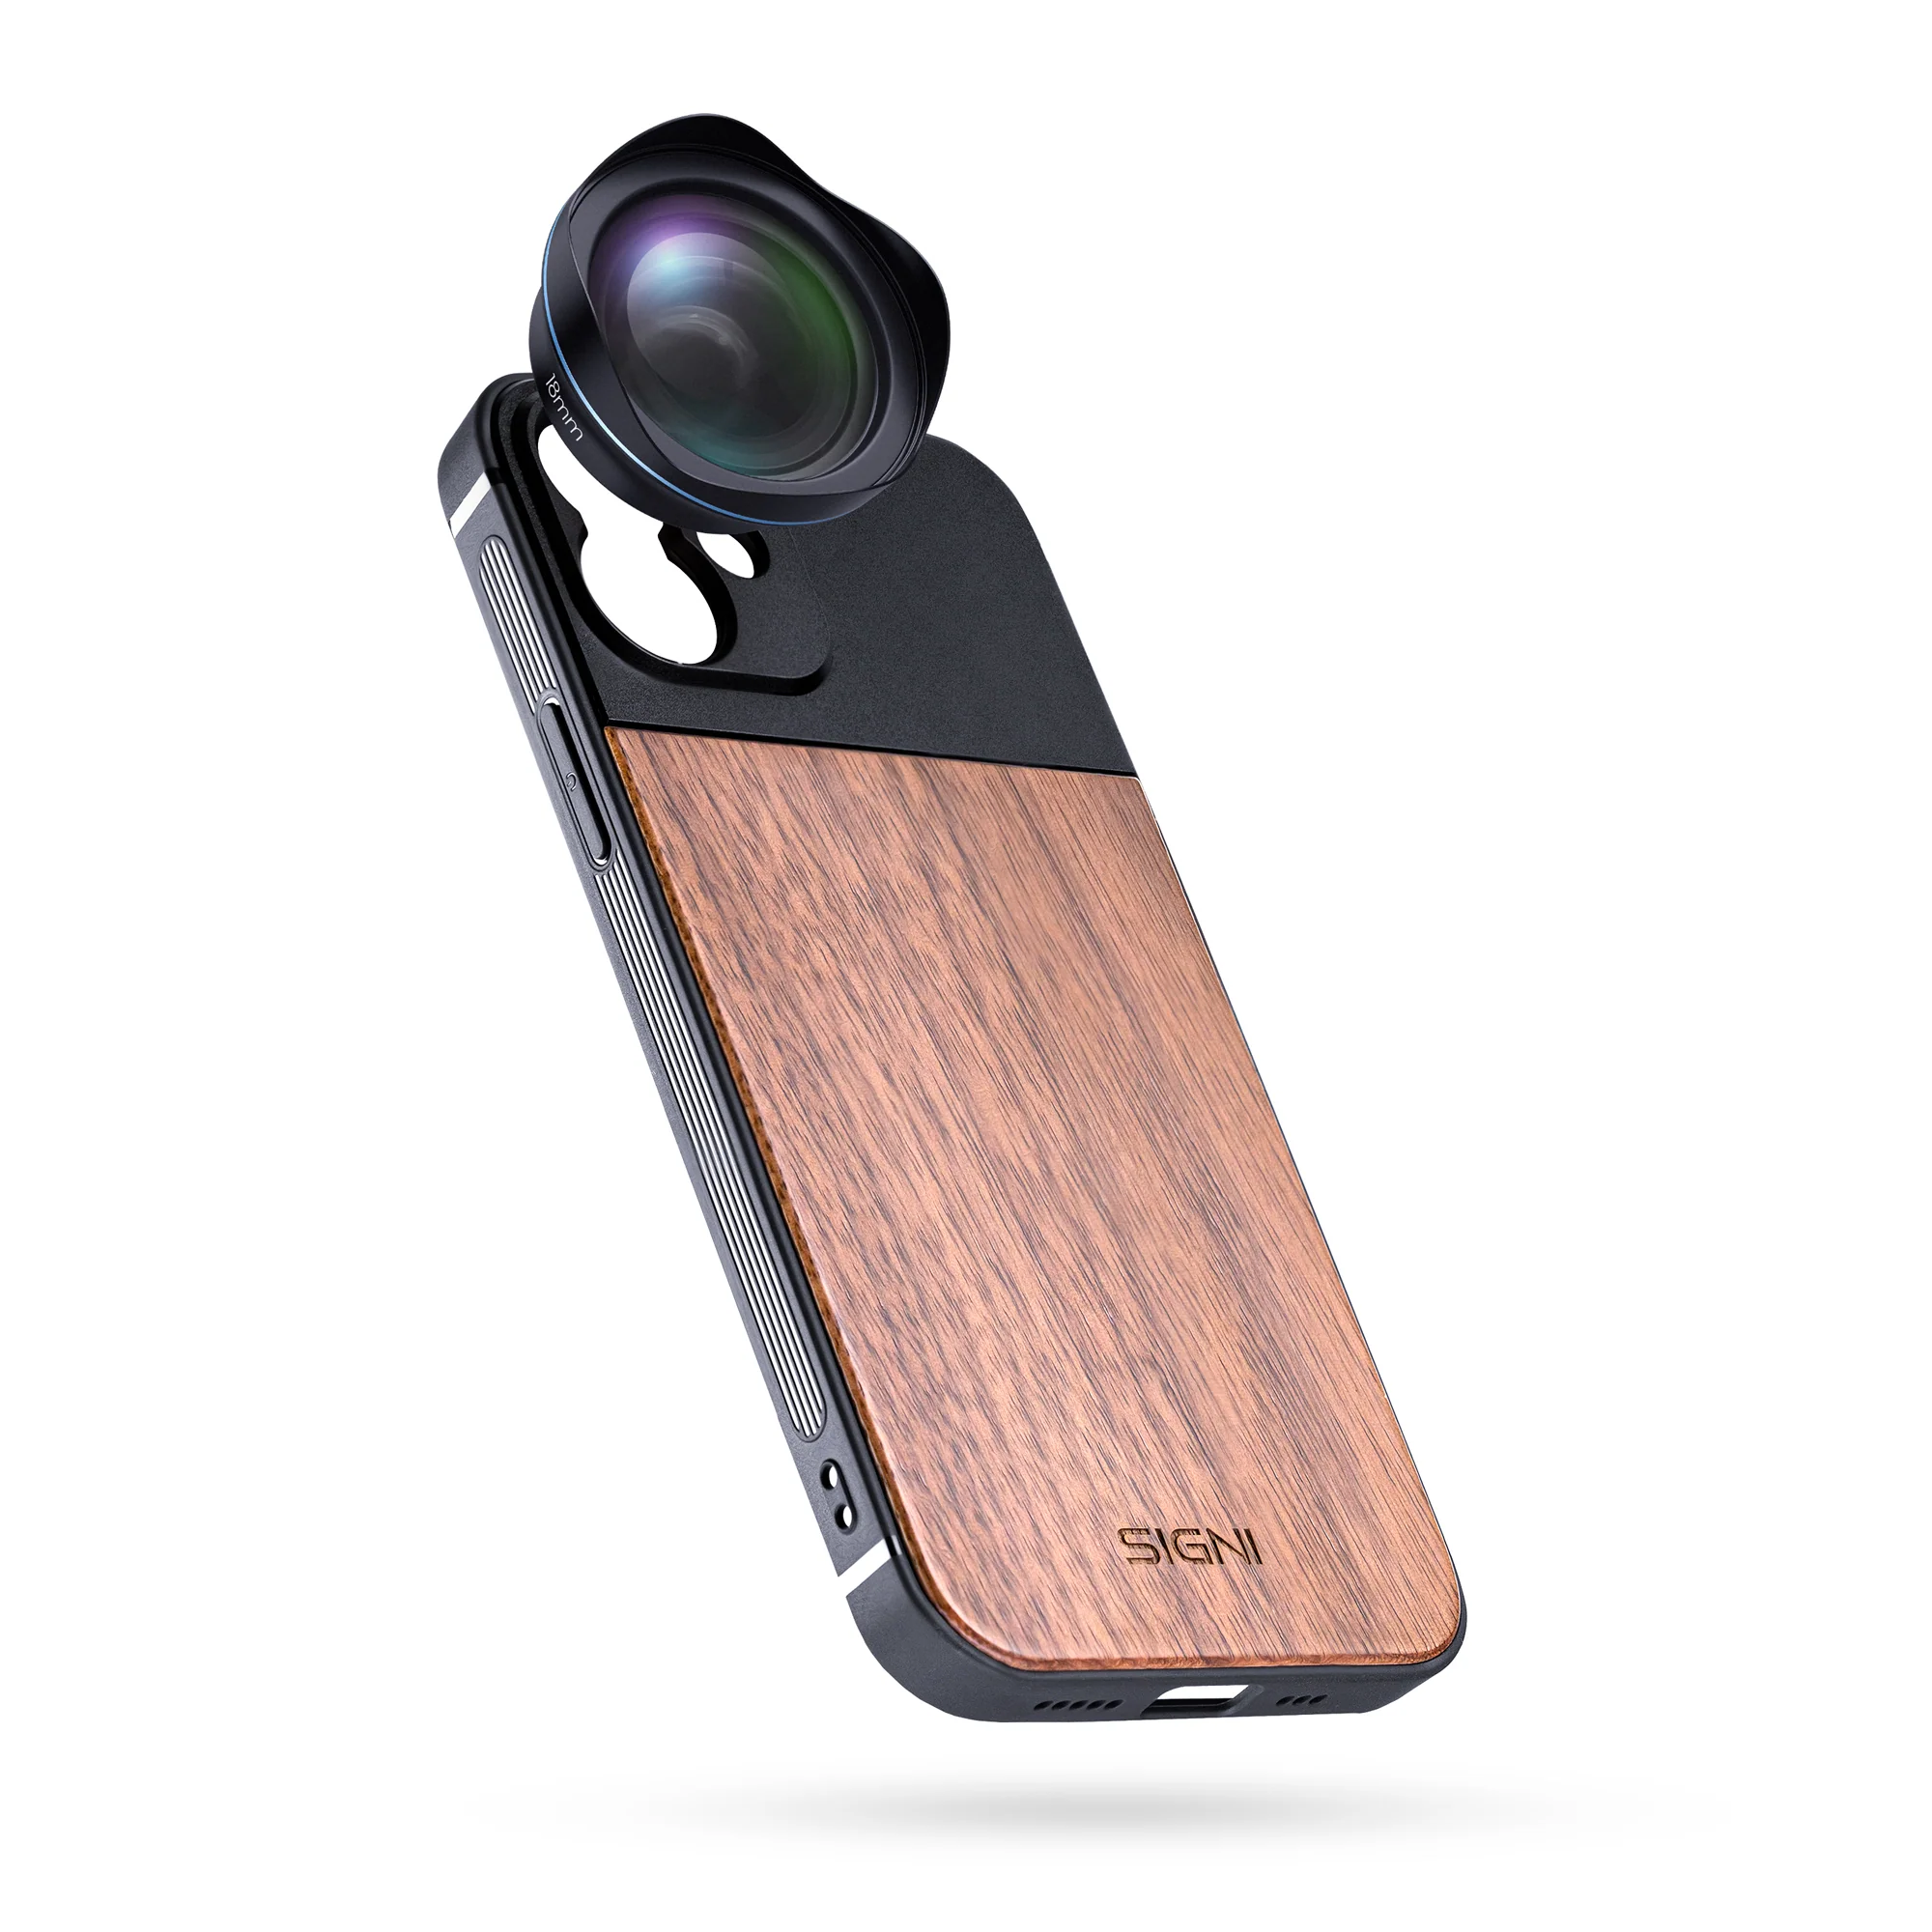 Discover Skyvik's Latest Phone Accessories: What's New in Our Collection